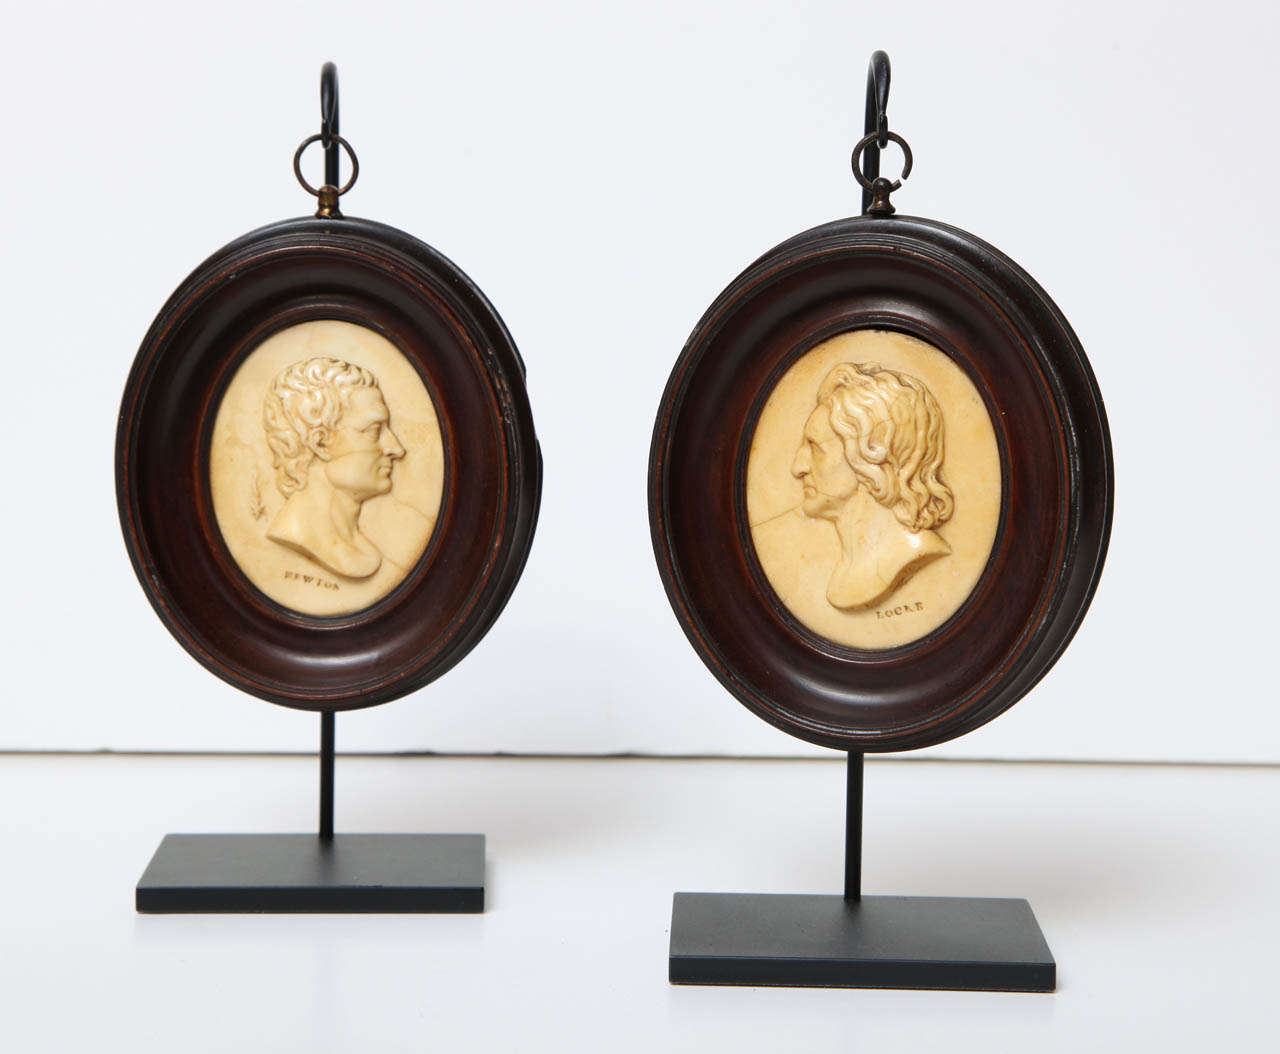 A pair of 19th century English wax oval portrait medallions of John Locke and Sir Isaac Newton set within mahogany frames circa 1820, mounted on contemporary stands